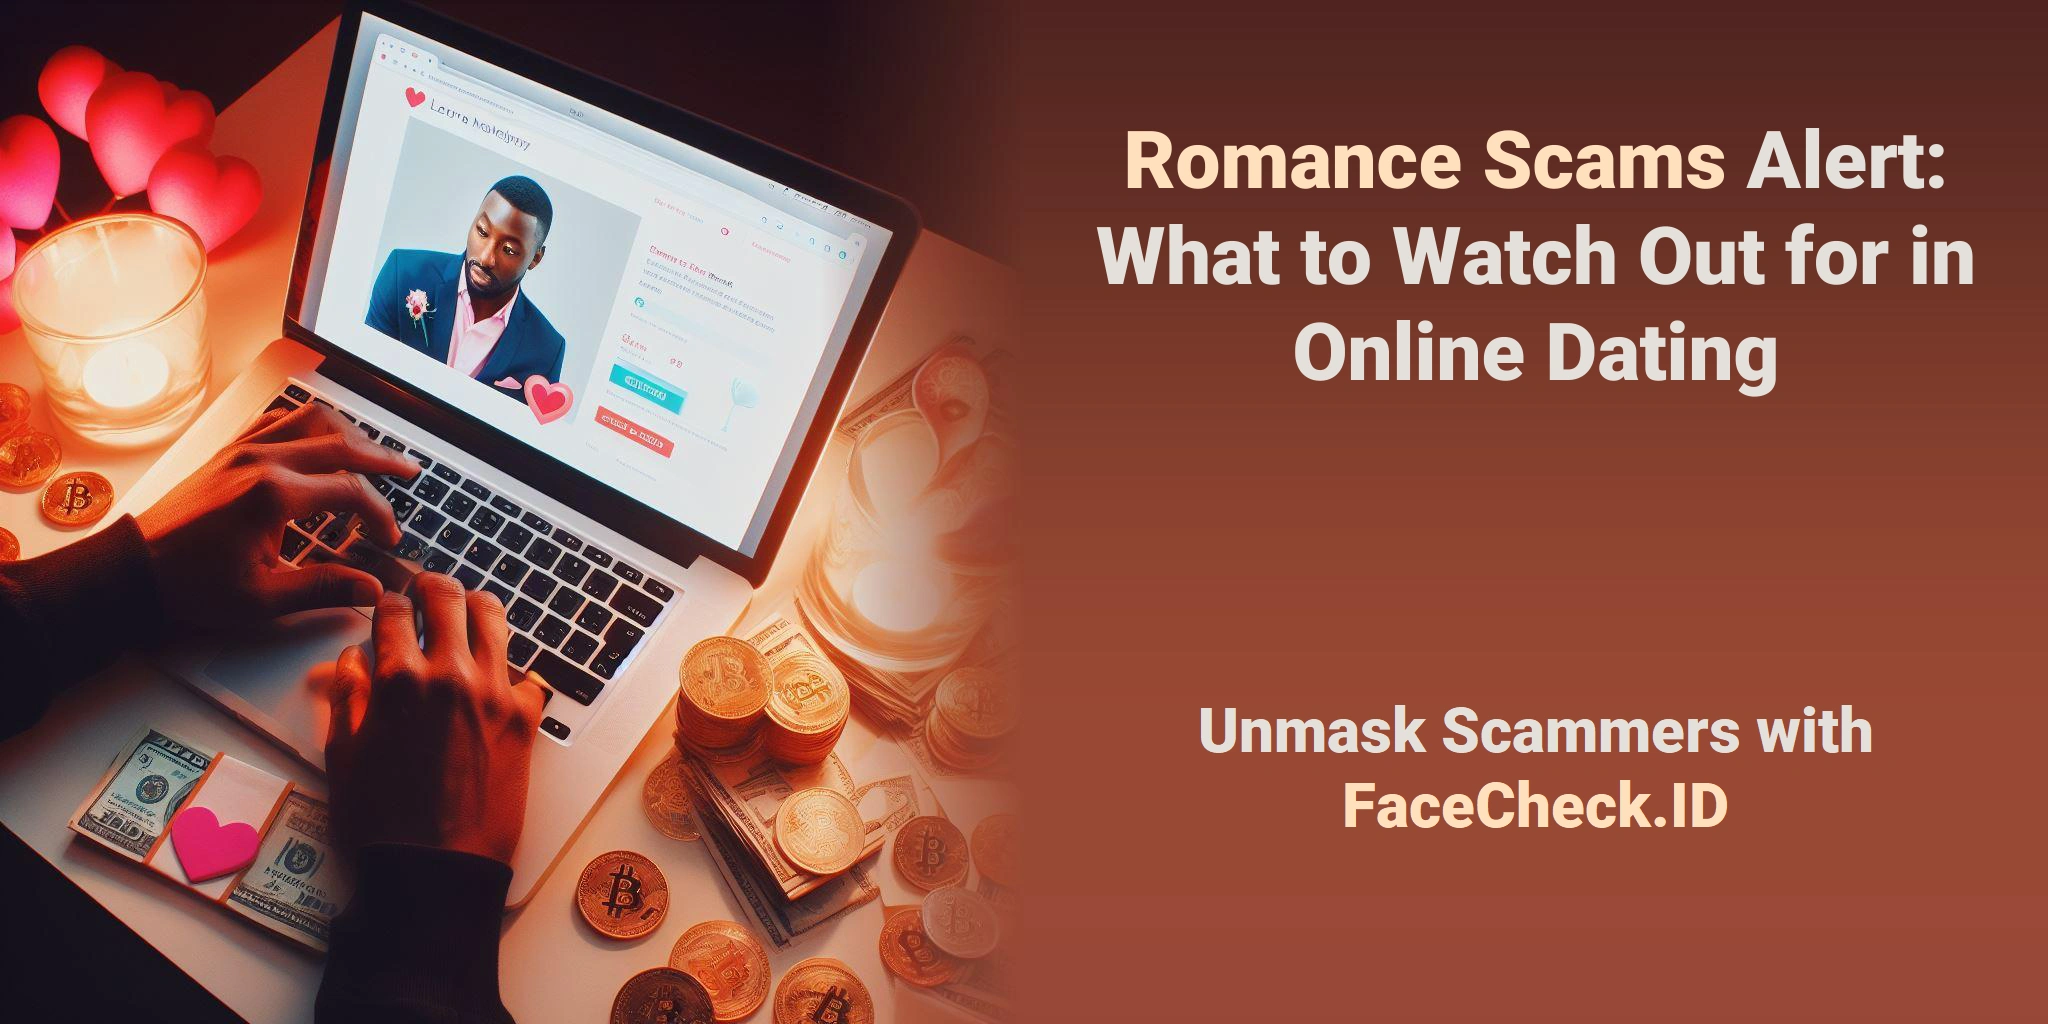 Romance Scams Alert: What to Watch Out for in Online Dating Unmask Scammers with FaceCheck.ID